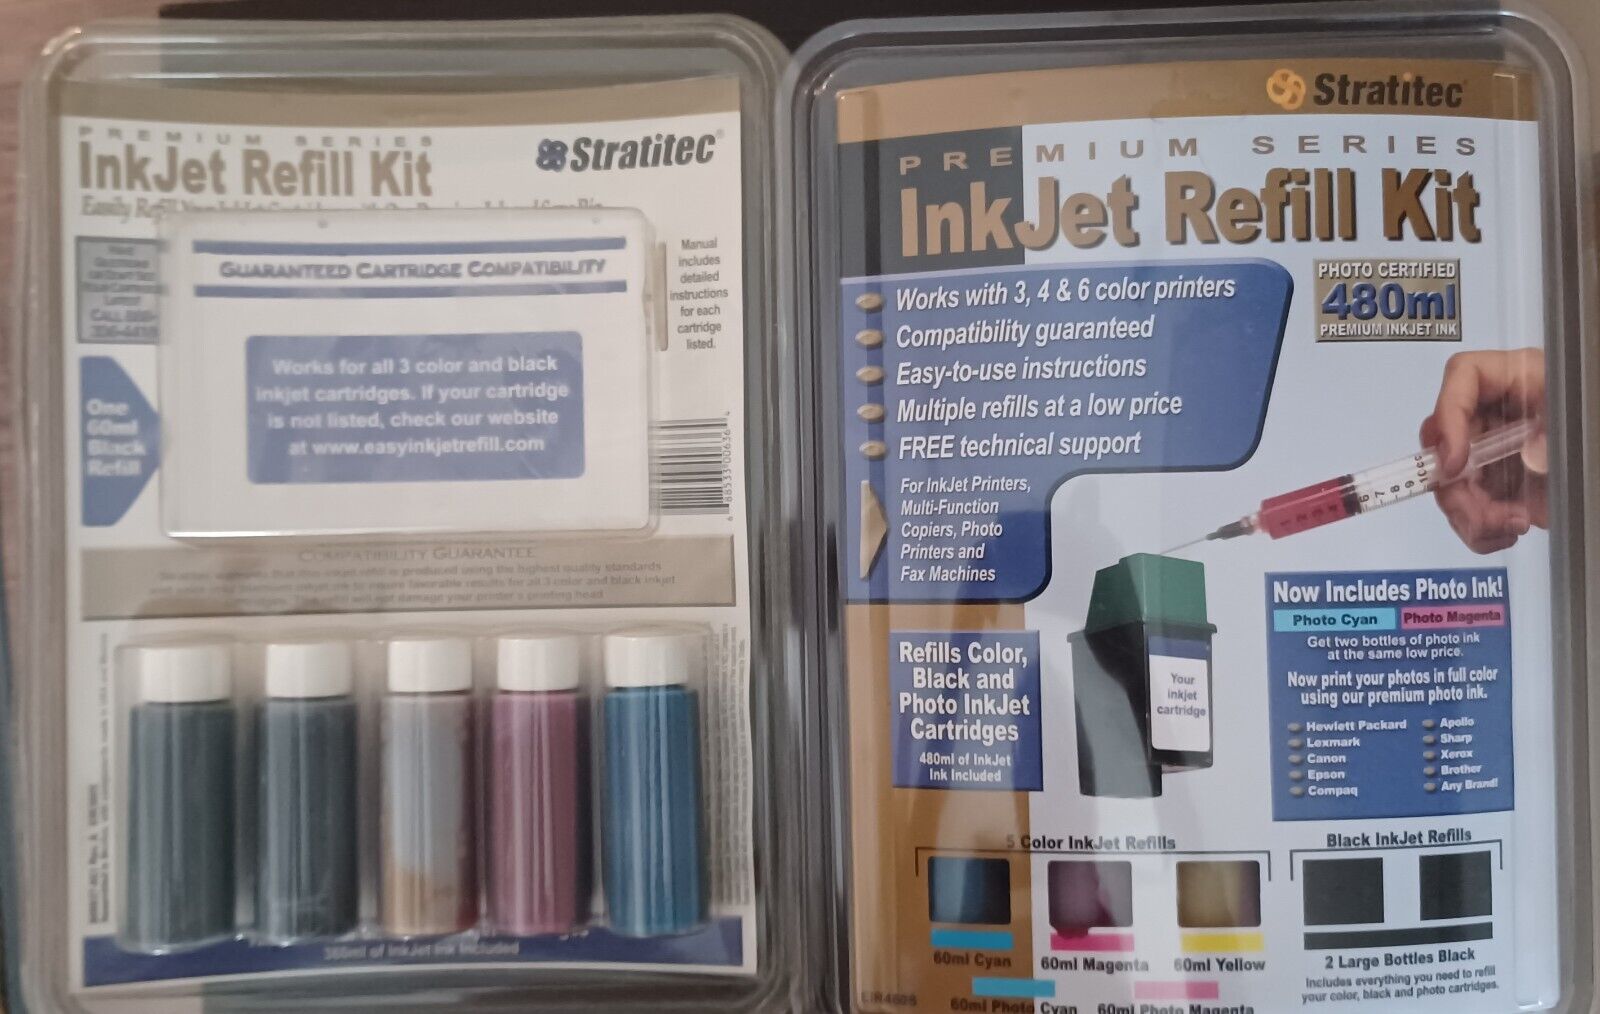 2 Stratitec Premium Series Inkjet Refill Kits~1 Unopened & 1 With 95% Of The Ink